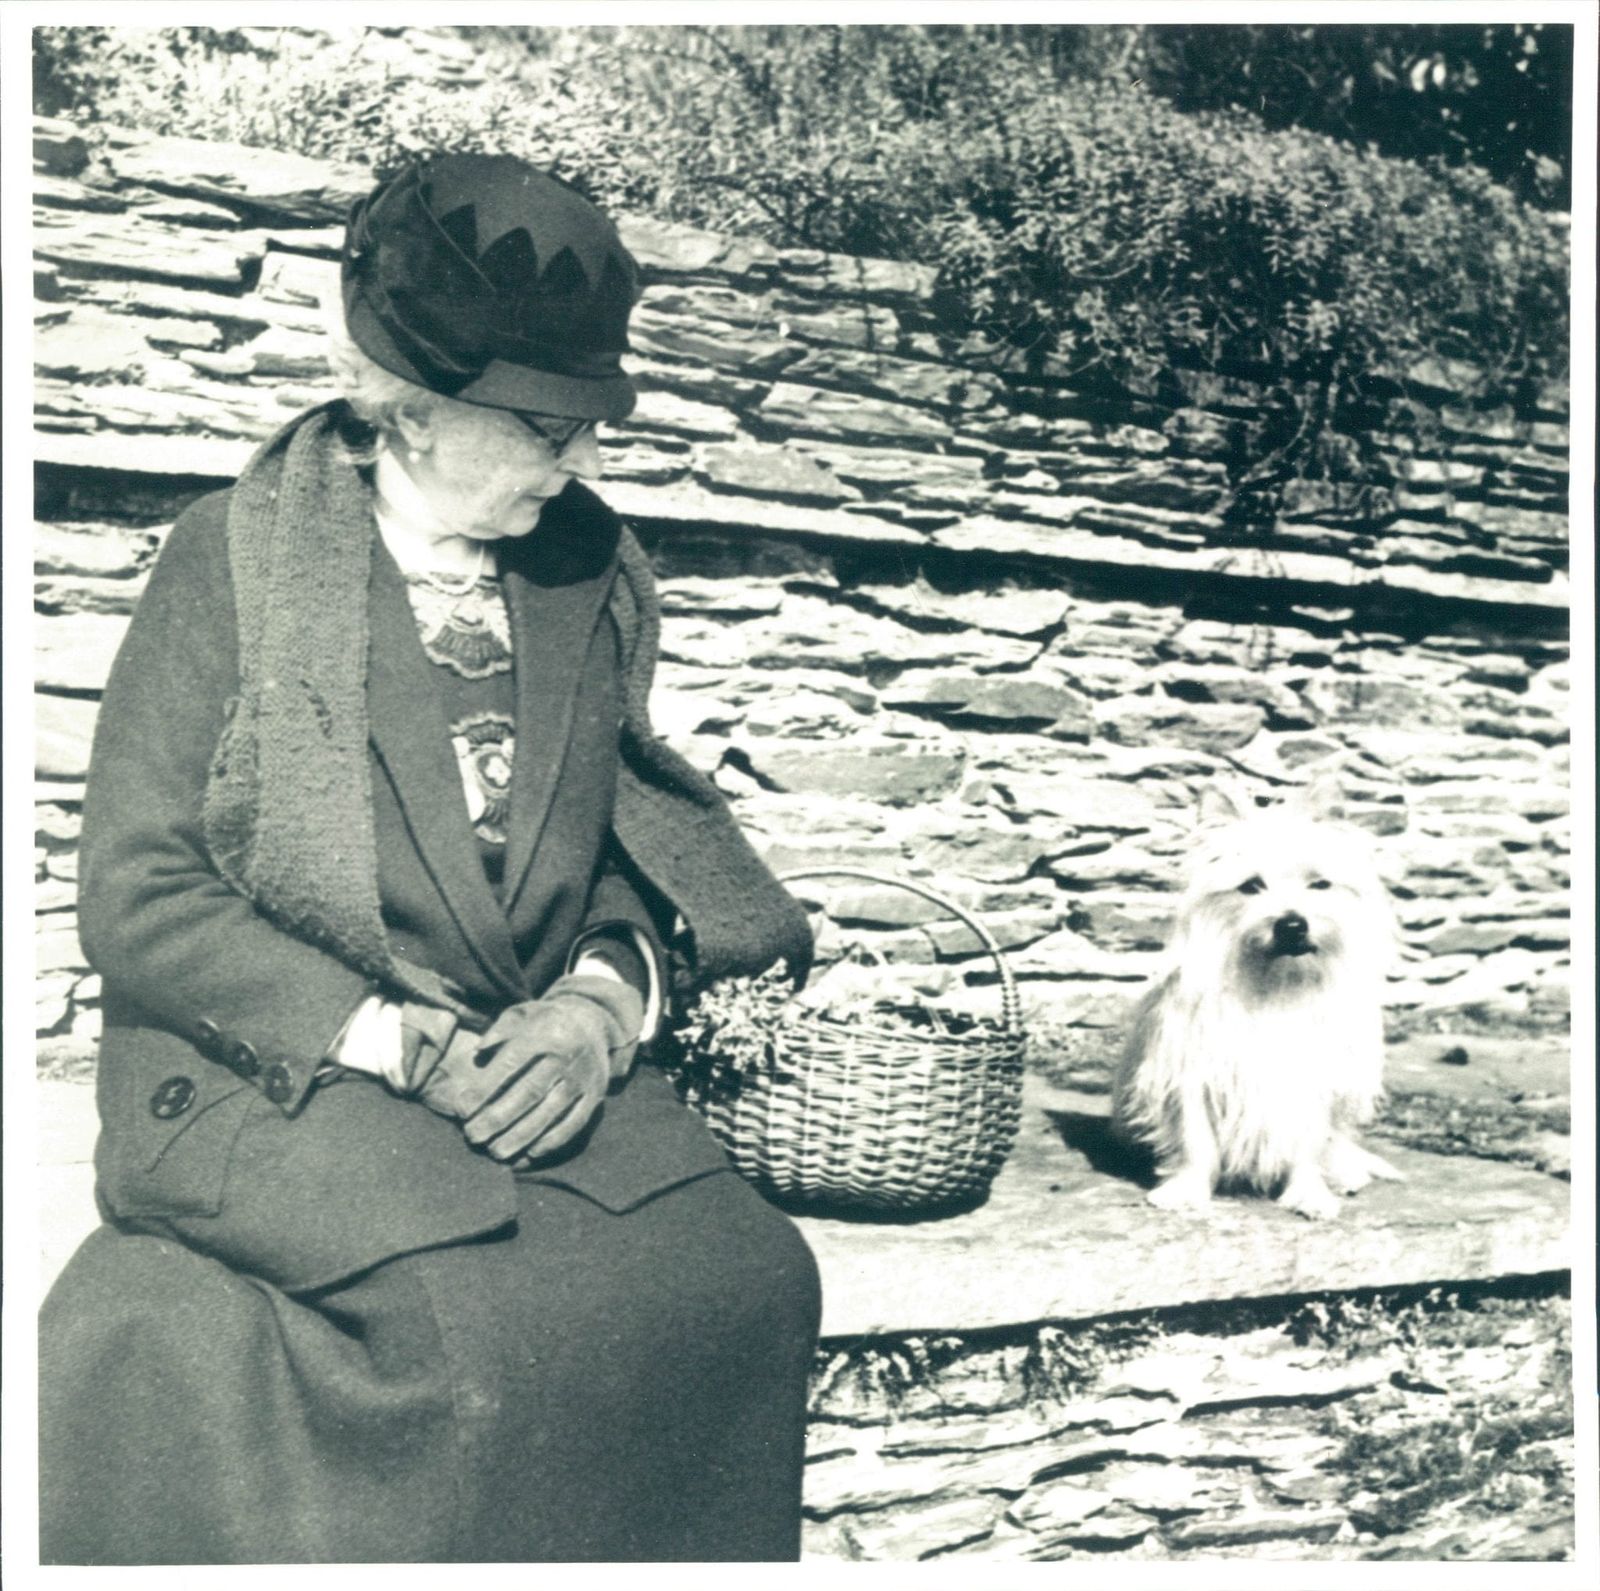 Mrs Portman with her dog, we celebrate the history of women at Hestercombe